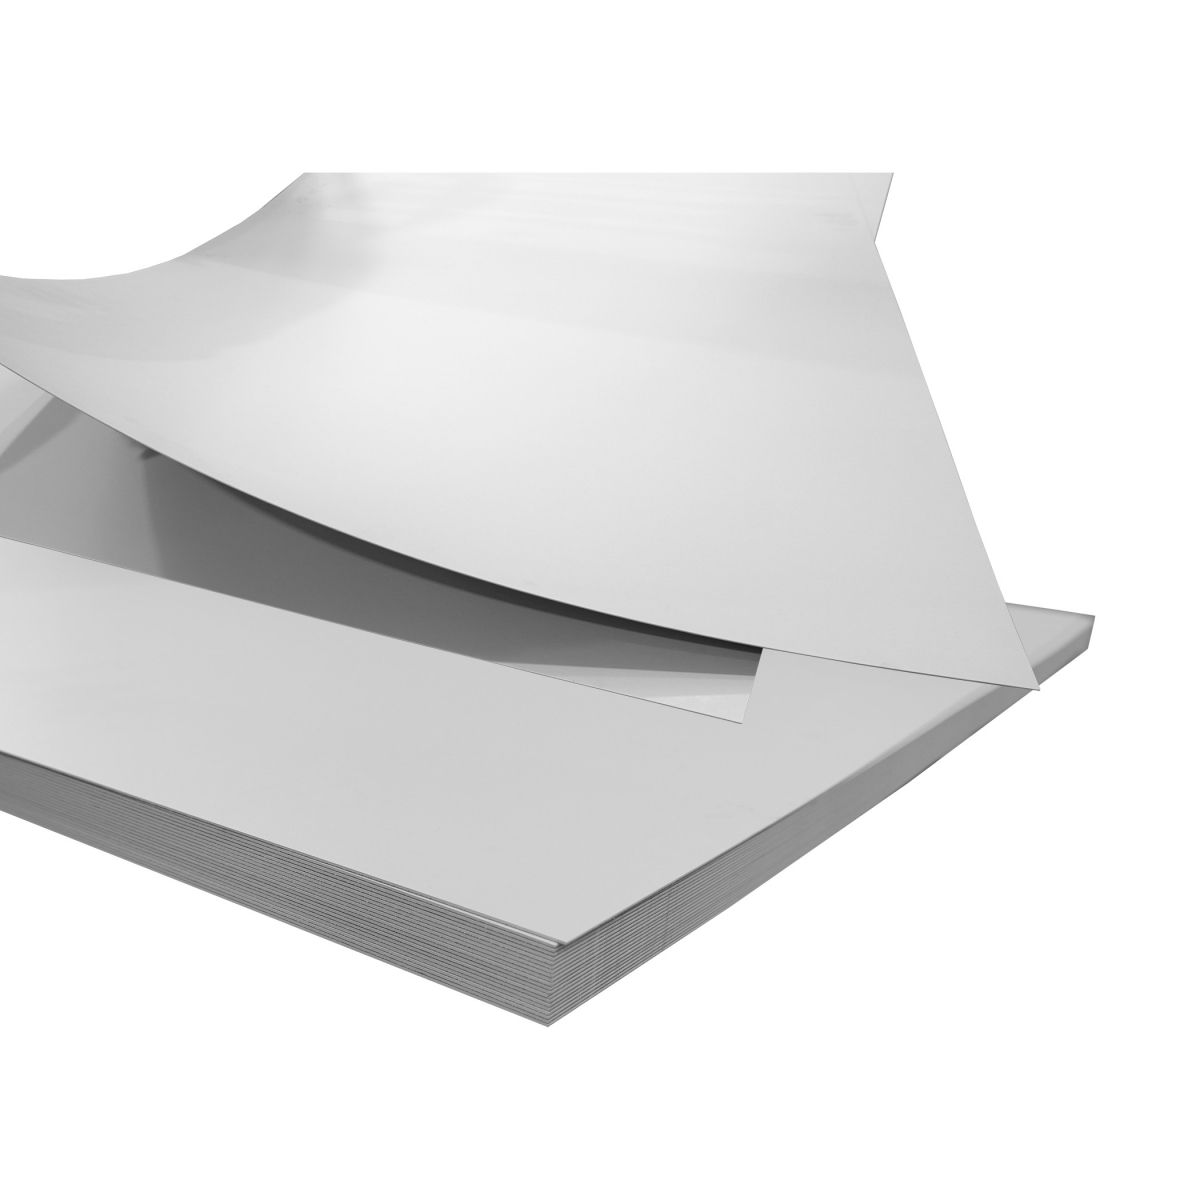 Plate grey 200 x 100 mm 0,8 mm thickness; PVC coated; coated steel sheet
 Plate grey 200 x 100 mm 0,8 mm thickness; PVC coated; coated steel sheet
